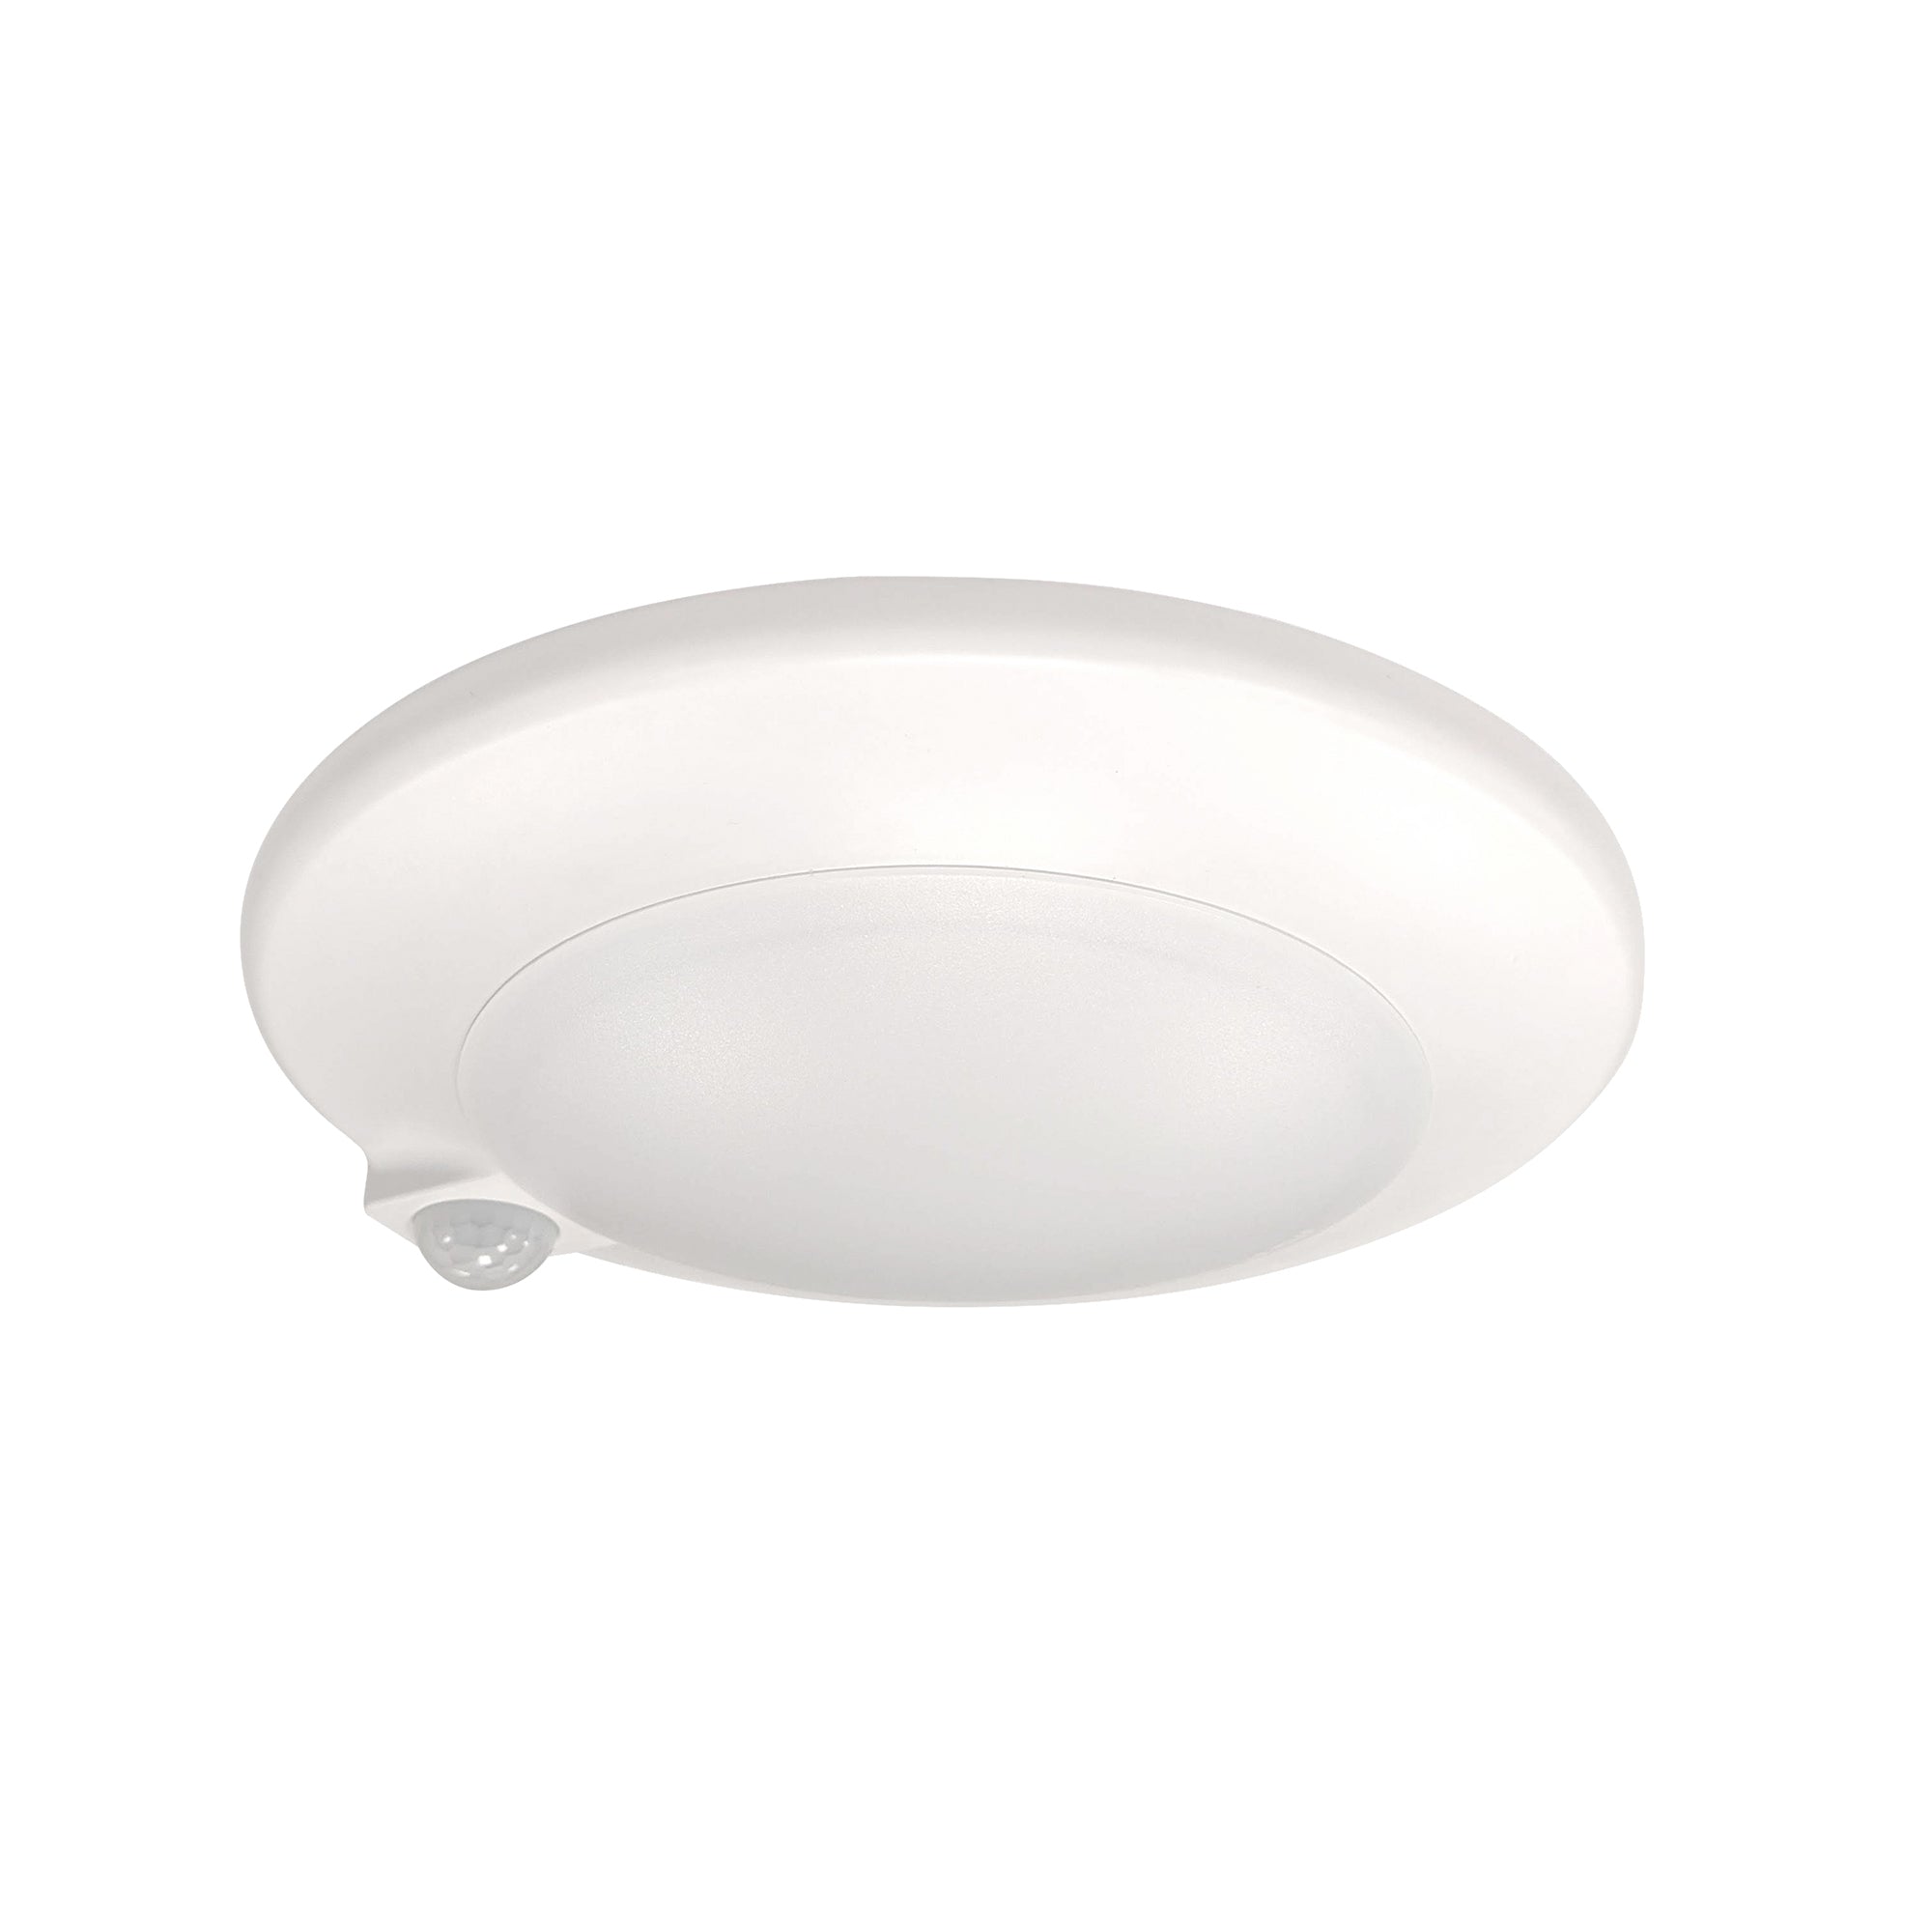 Nora Lighting NLOPAC-R7MS40W - Surface - 7 Inch AC Opal LED Surface Mount with PIR Motion Sensor, 1050lm / 15W, 4000K, White finish